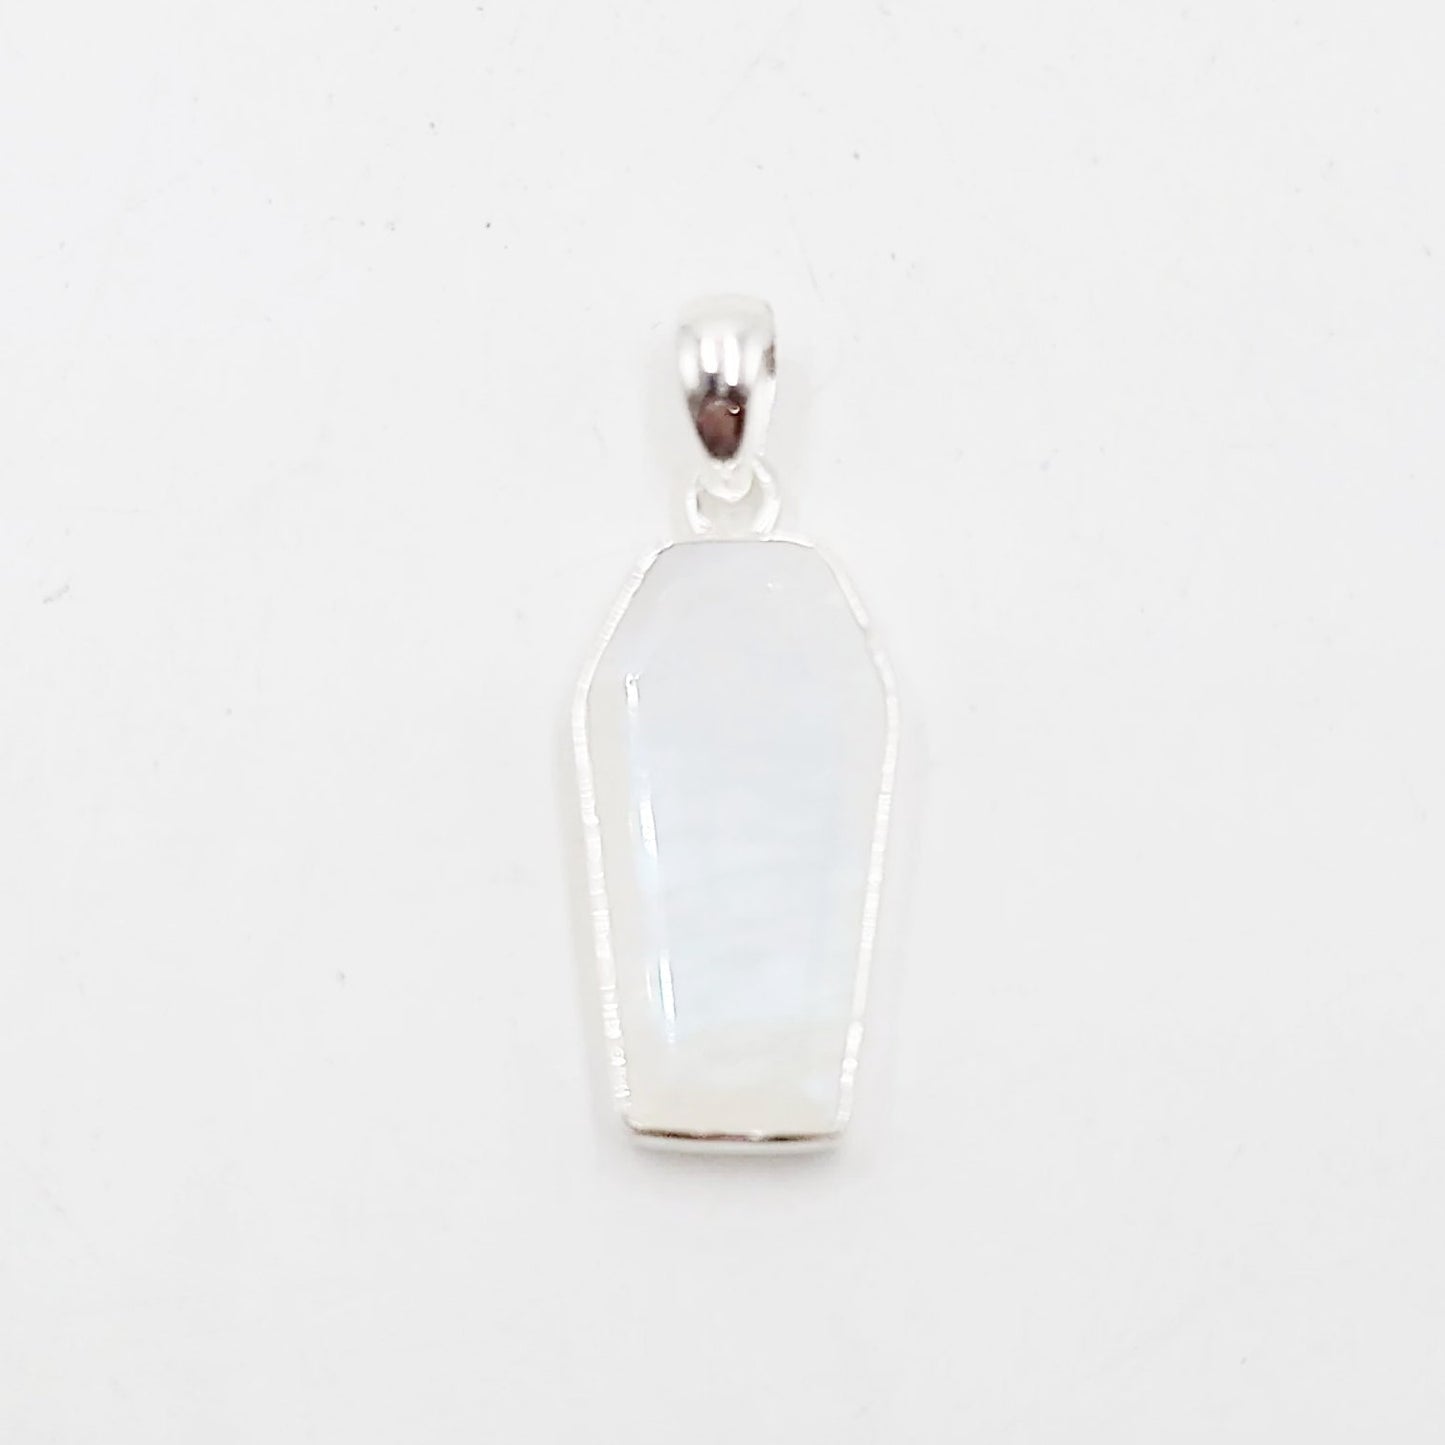 Blue Fire Rainbow Moonstone Coffin Pendant Sterling Silver Charm - Elevated Metaphysical